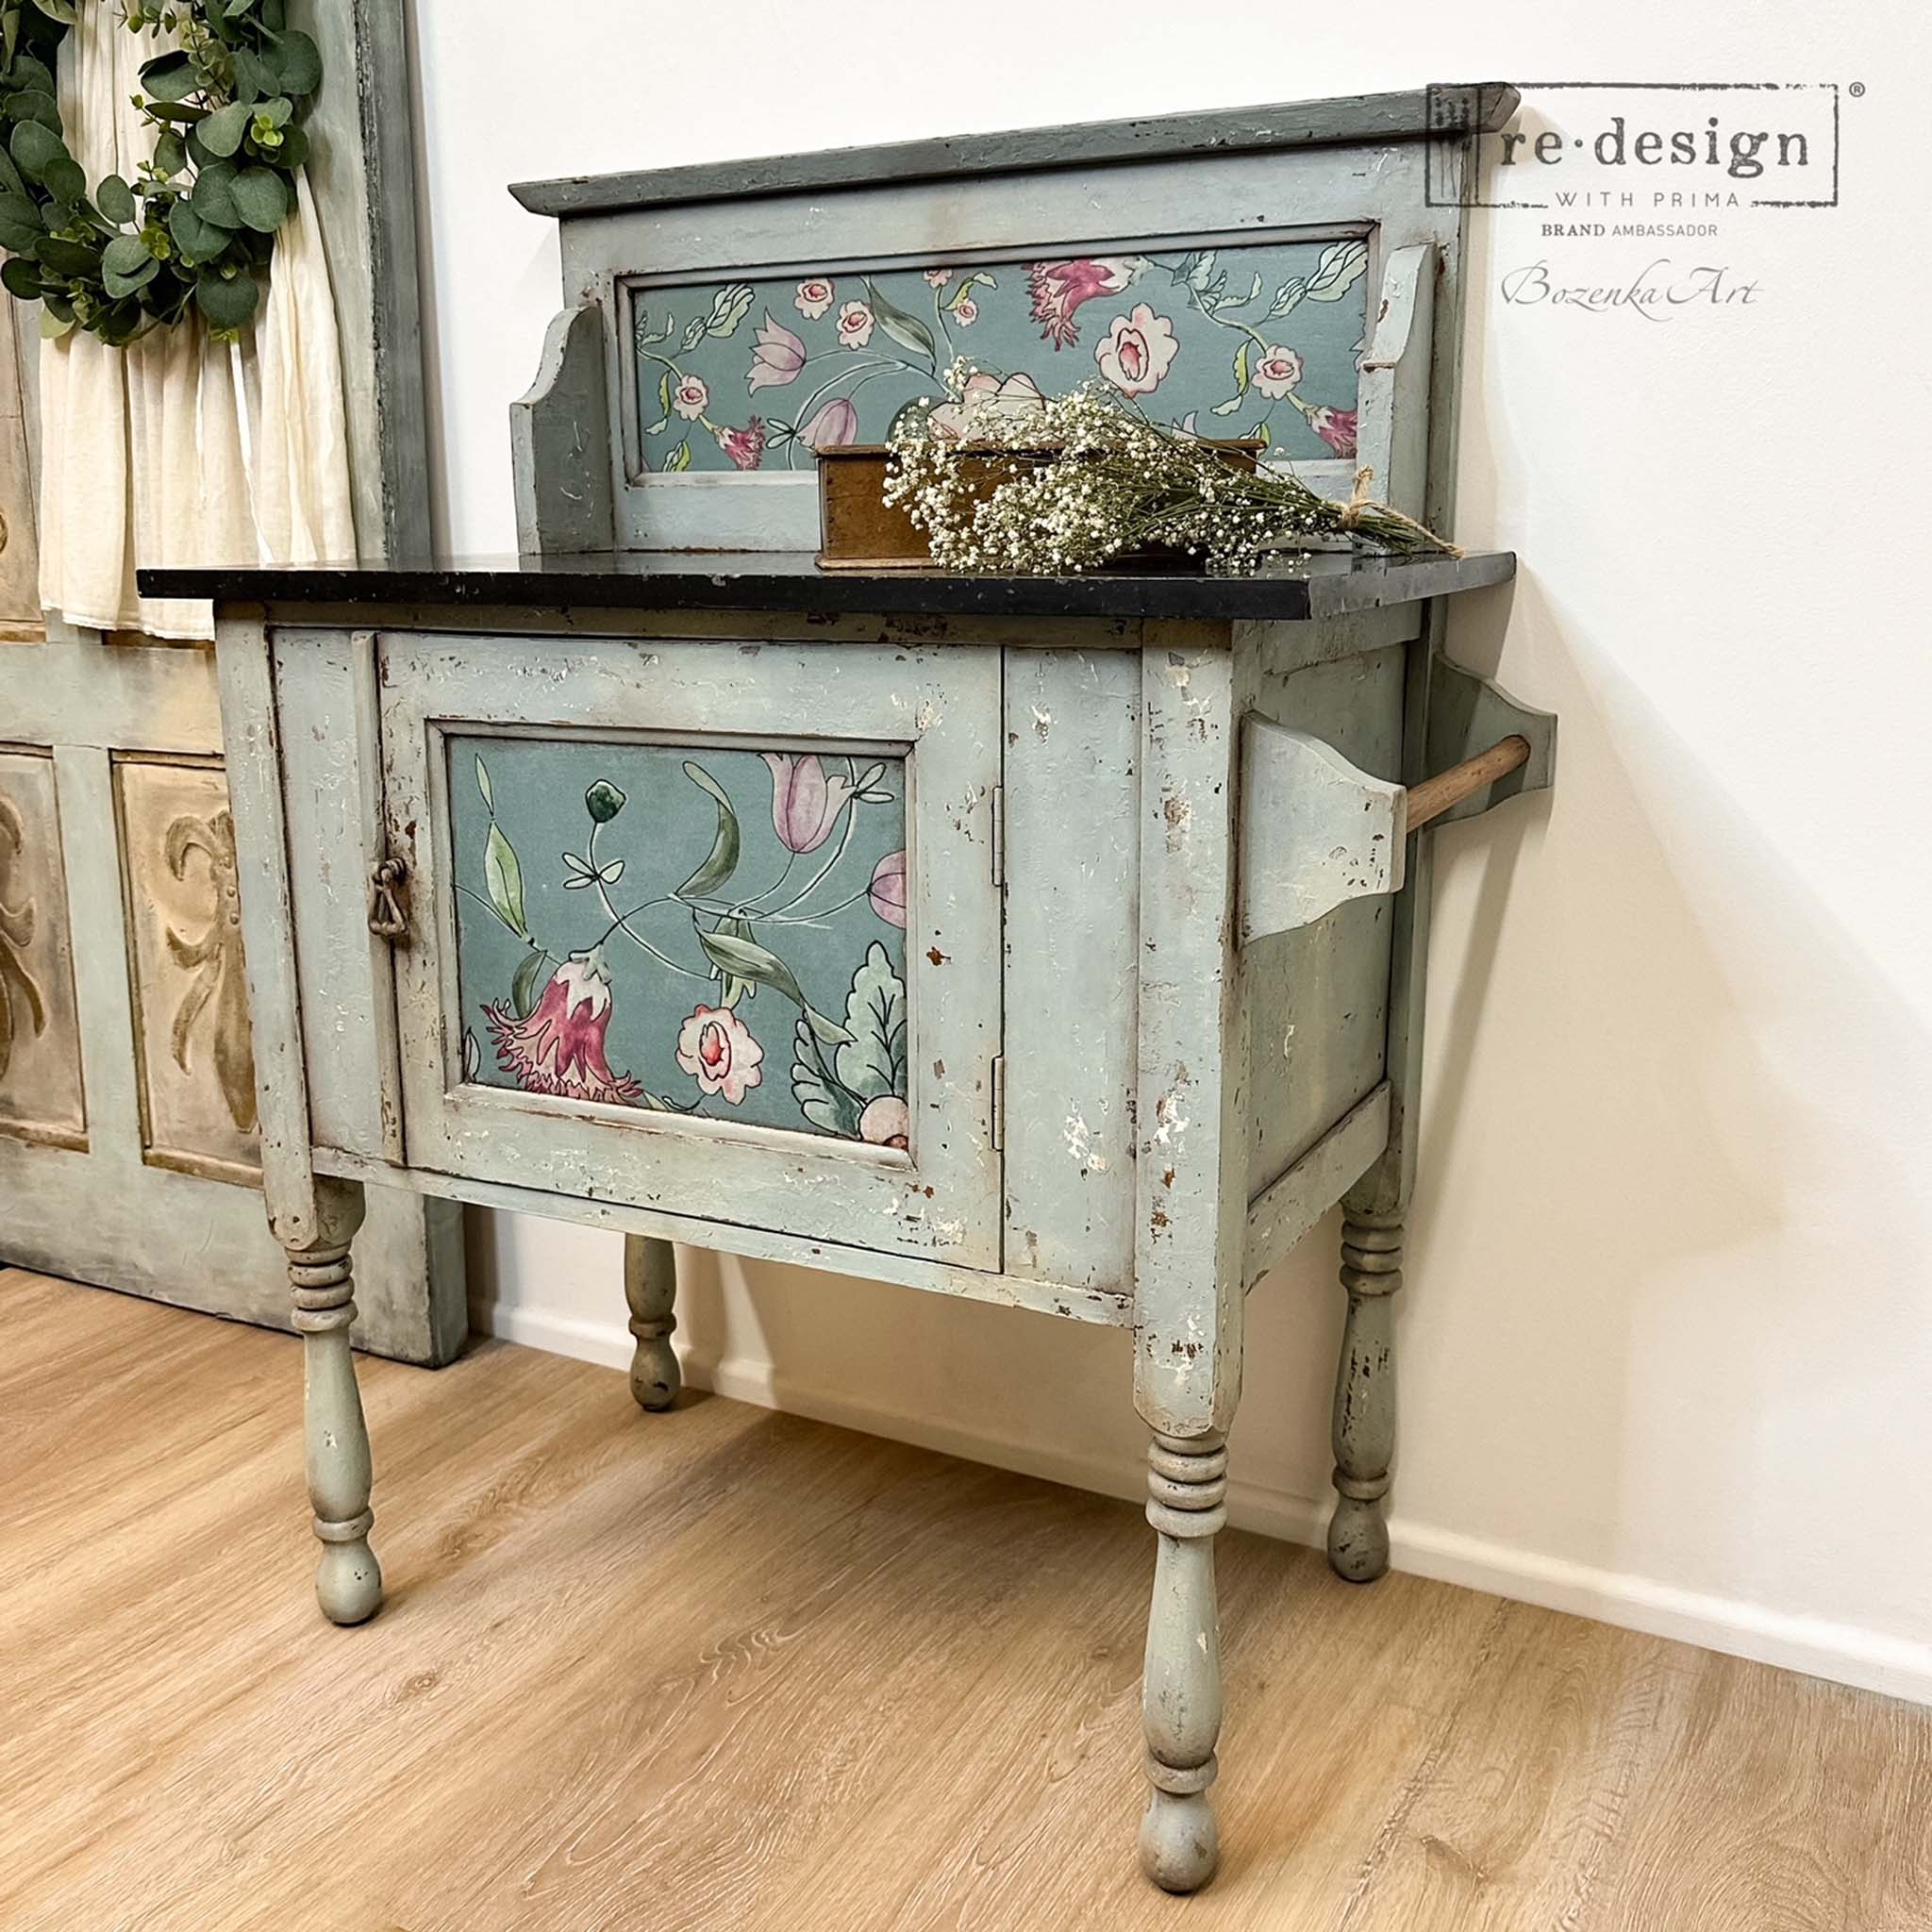 An angled view of a vintage bar cart table refurbished by Bozenka Art is painted light gray and features ReDesign with Prima's Swedish Posy A1 Fiber Paper by Annie Sloan on it.